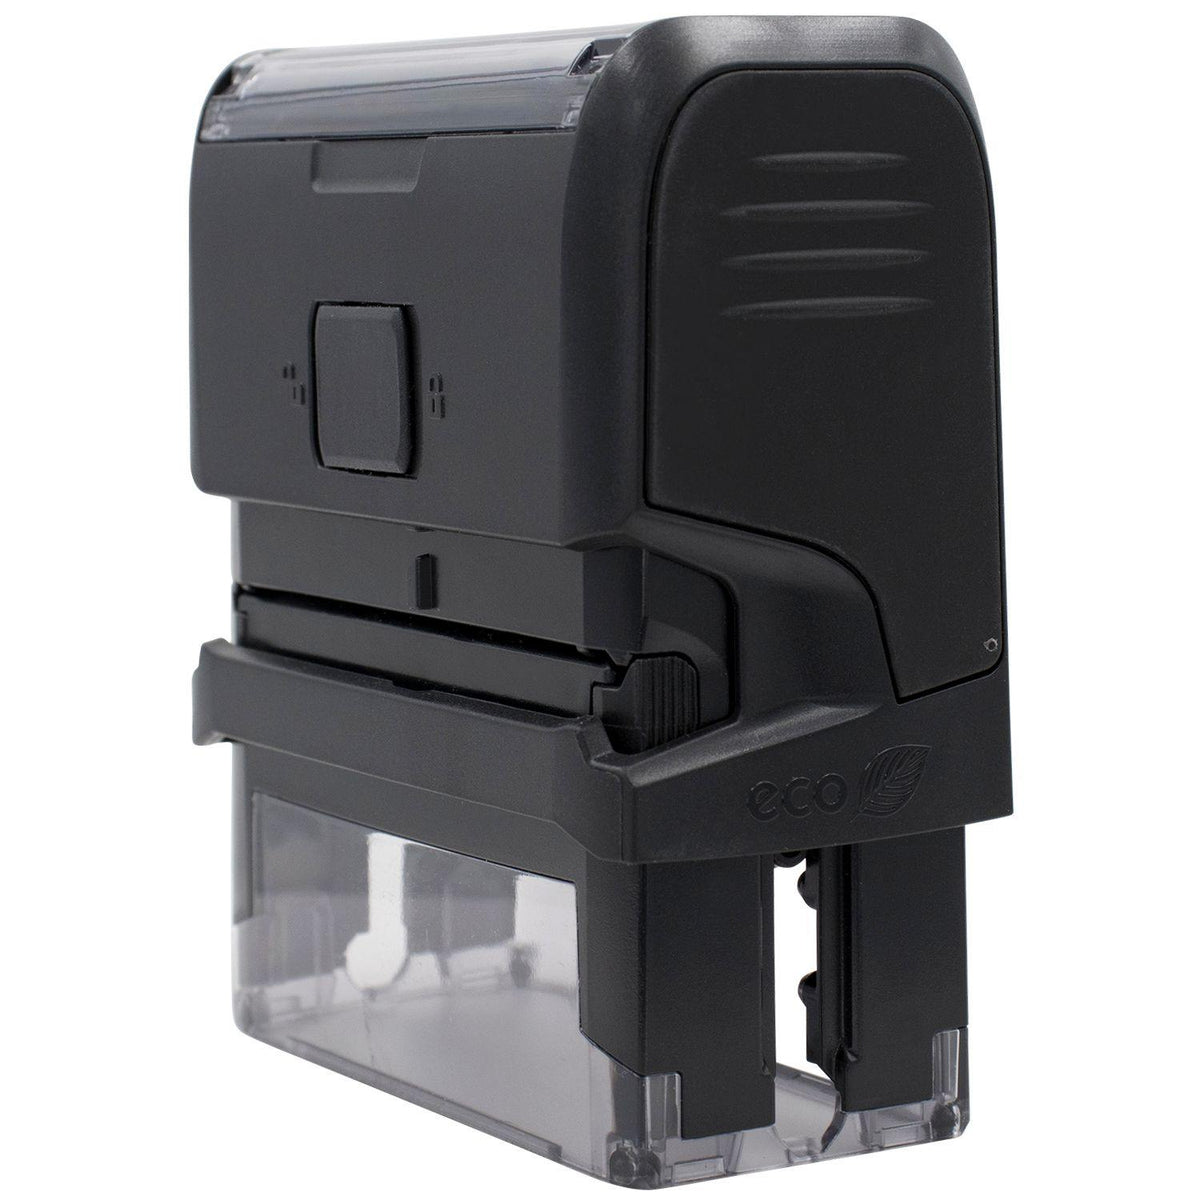 Large Self-Inking To The Parents Of with Line Stamp - Engineer Seal Stamps - Brand_Trodat, Impression Size_Large, Stamp Type_Self-Inking Stamp, Type of Use_Teacher